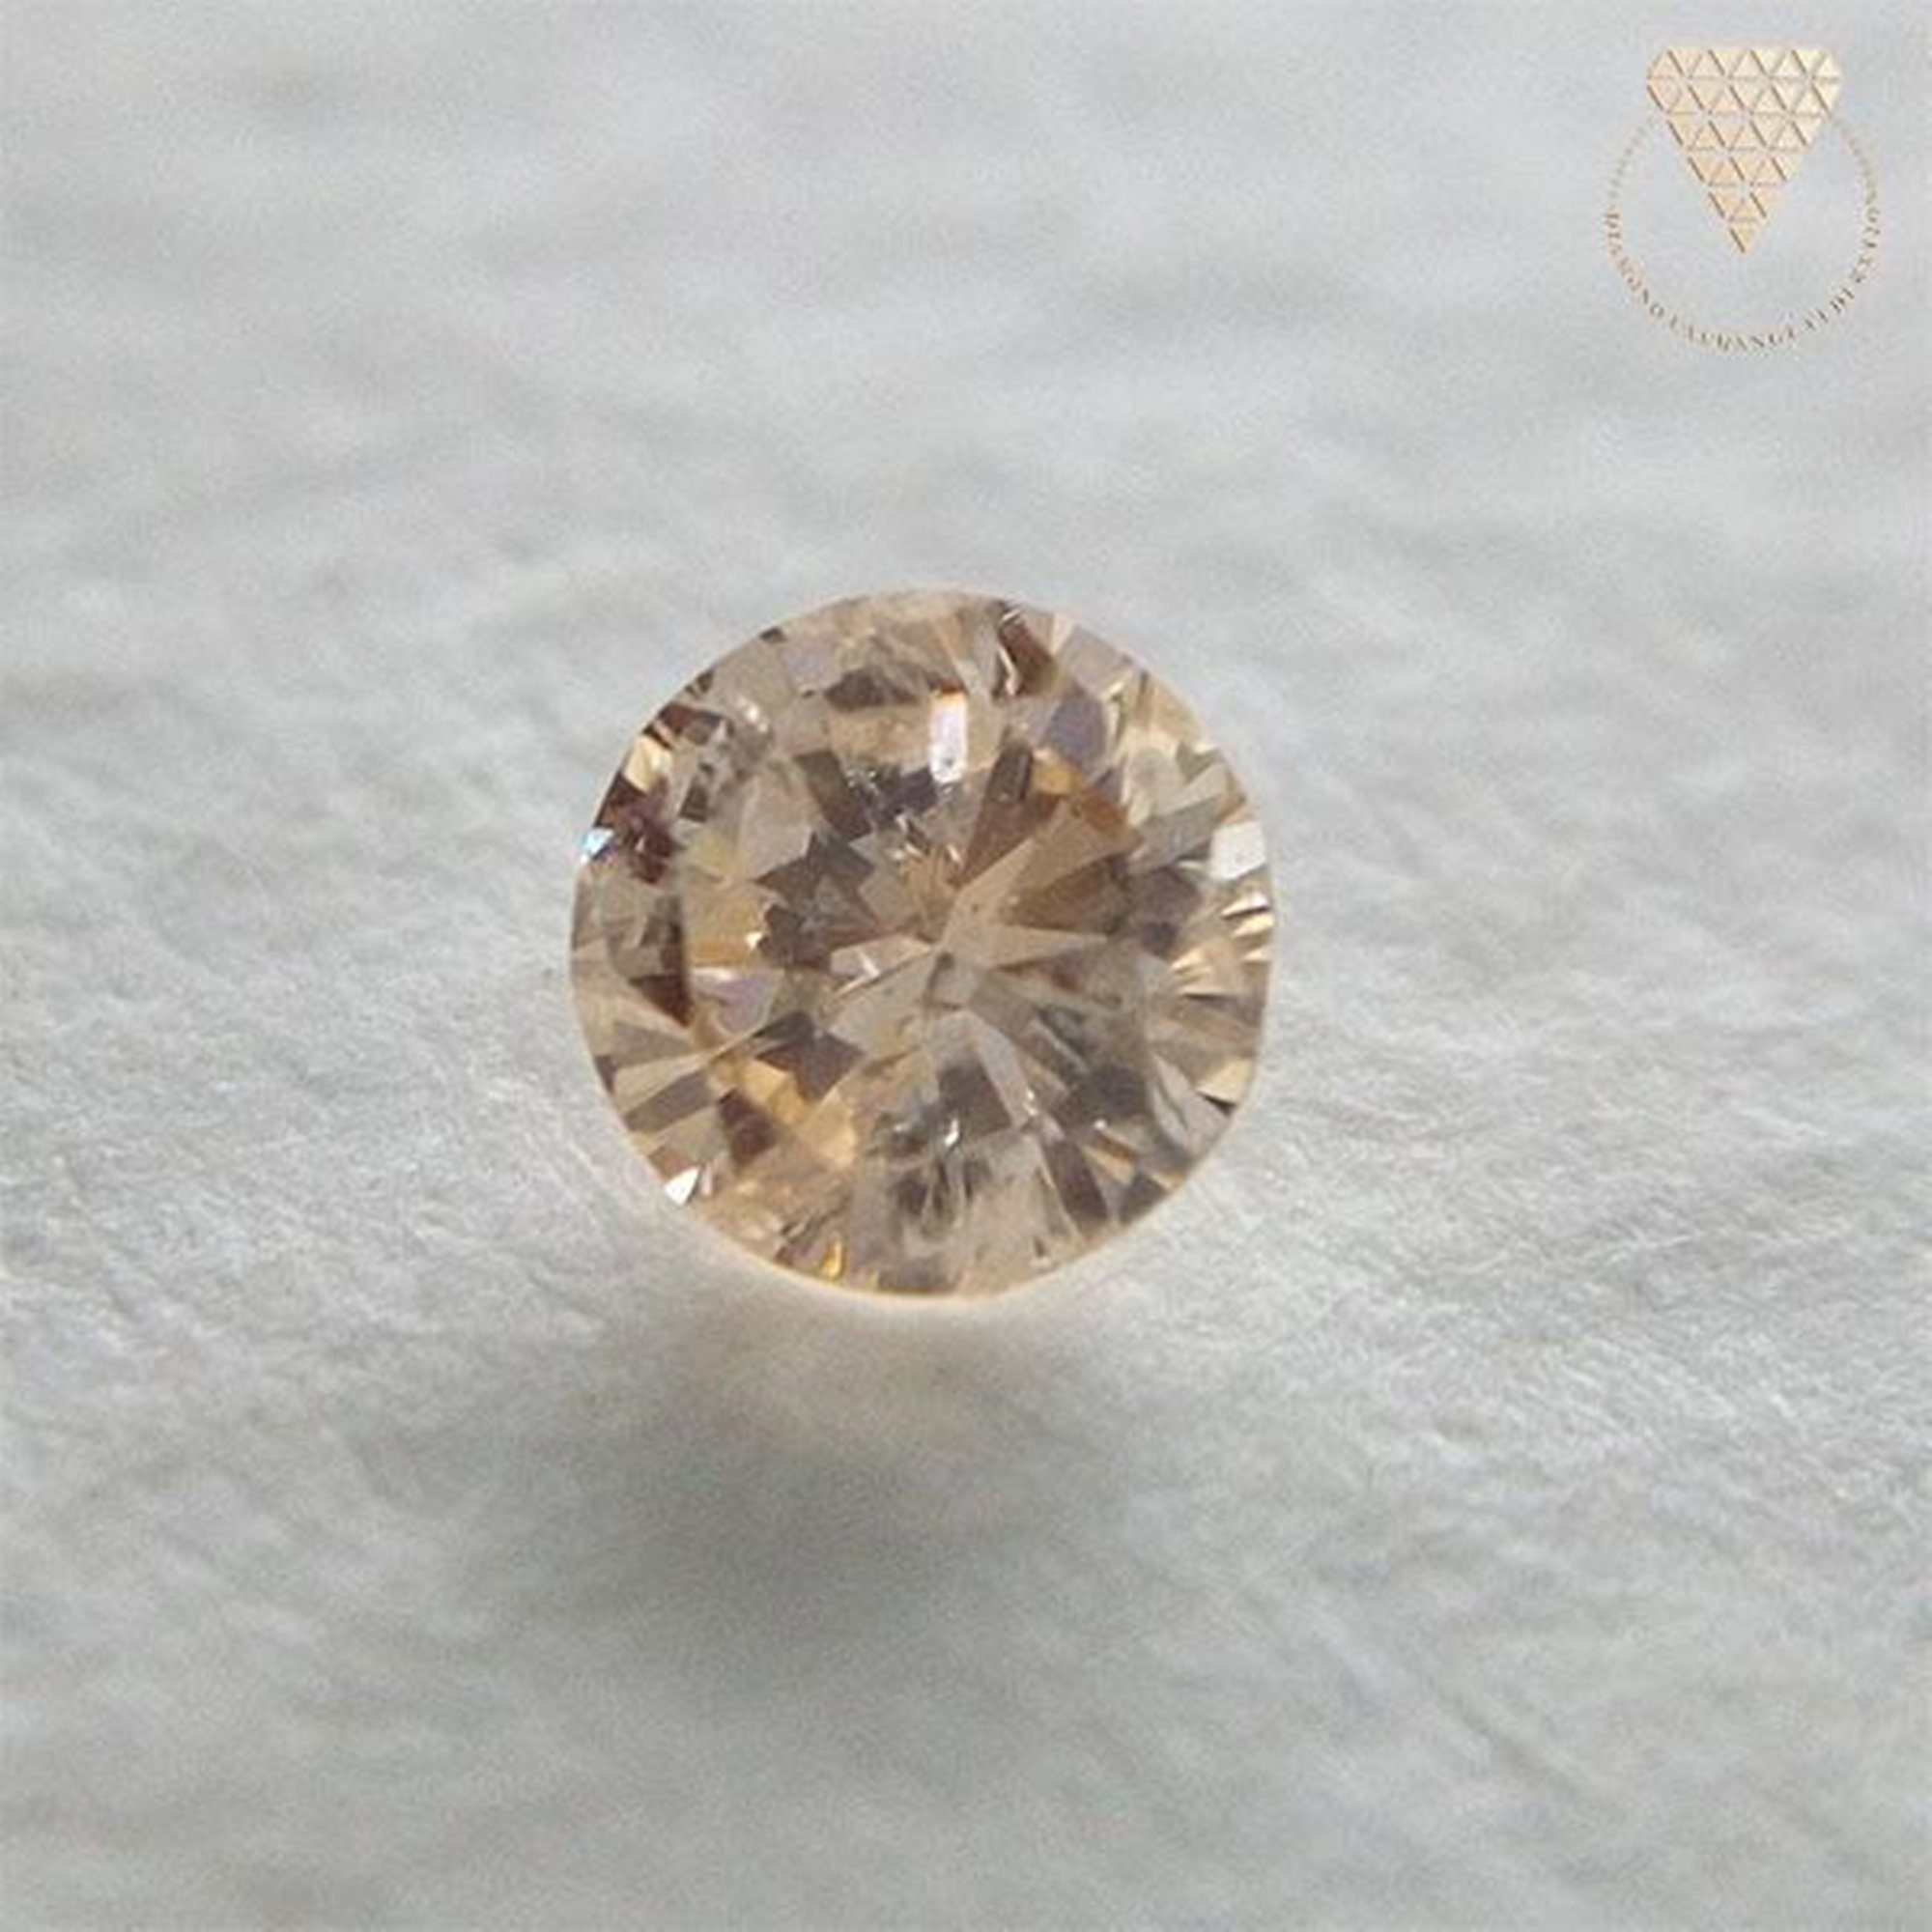 0.104 Ct Fancy Light Orangy Yellow I1 CGL Japan Natural Loose - Etsy